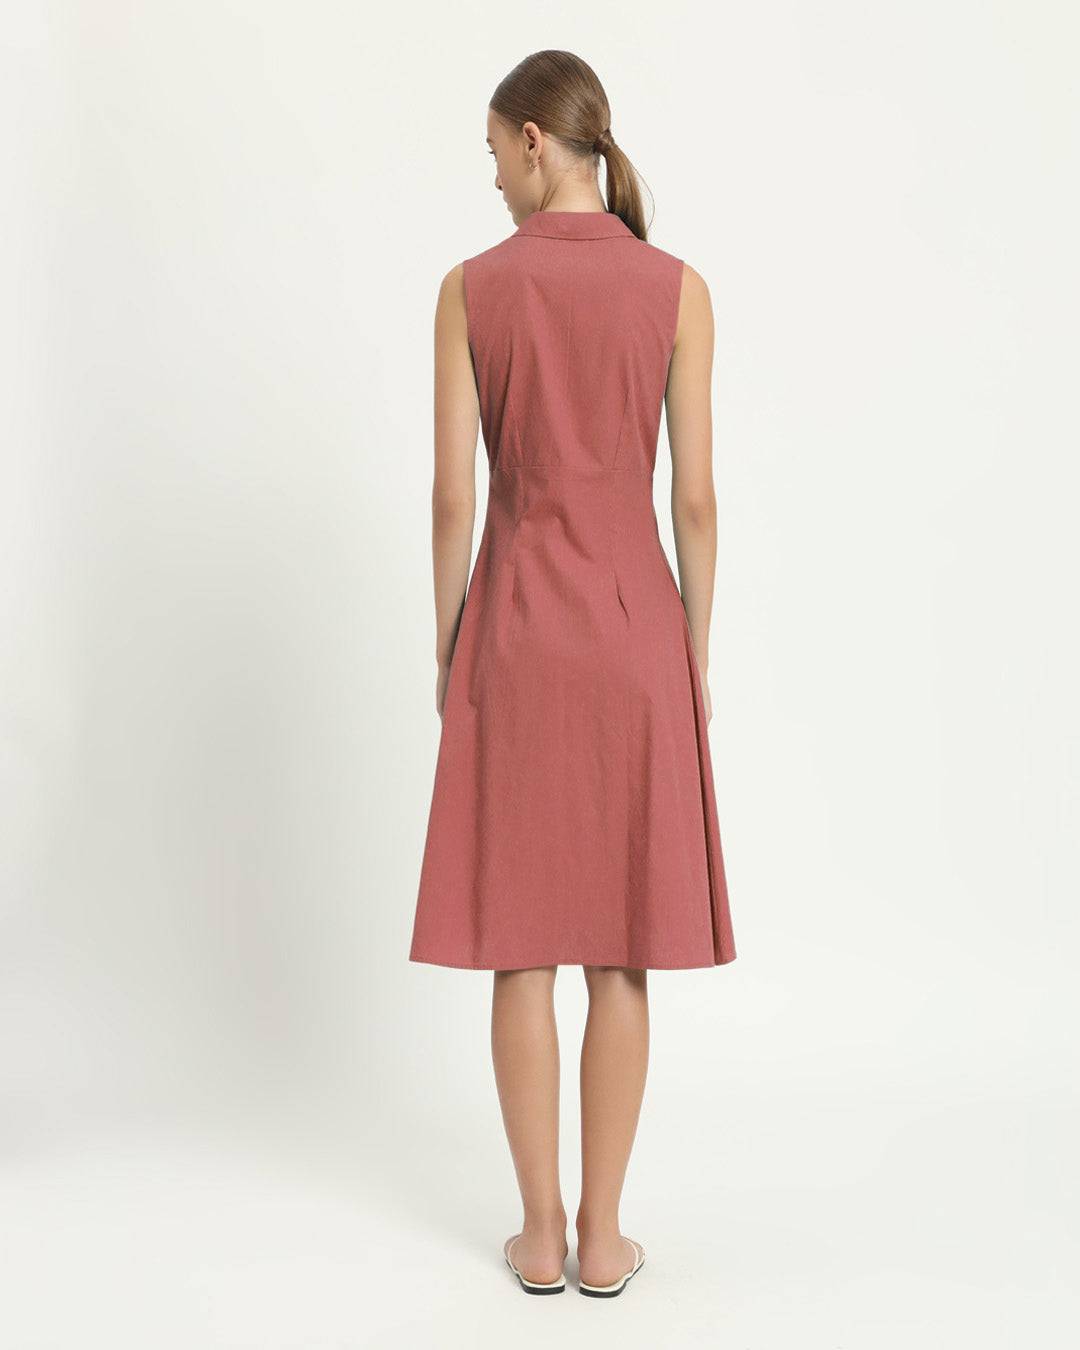 The Germering Ivory Pink Cotton Dress